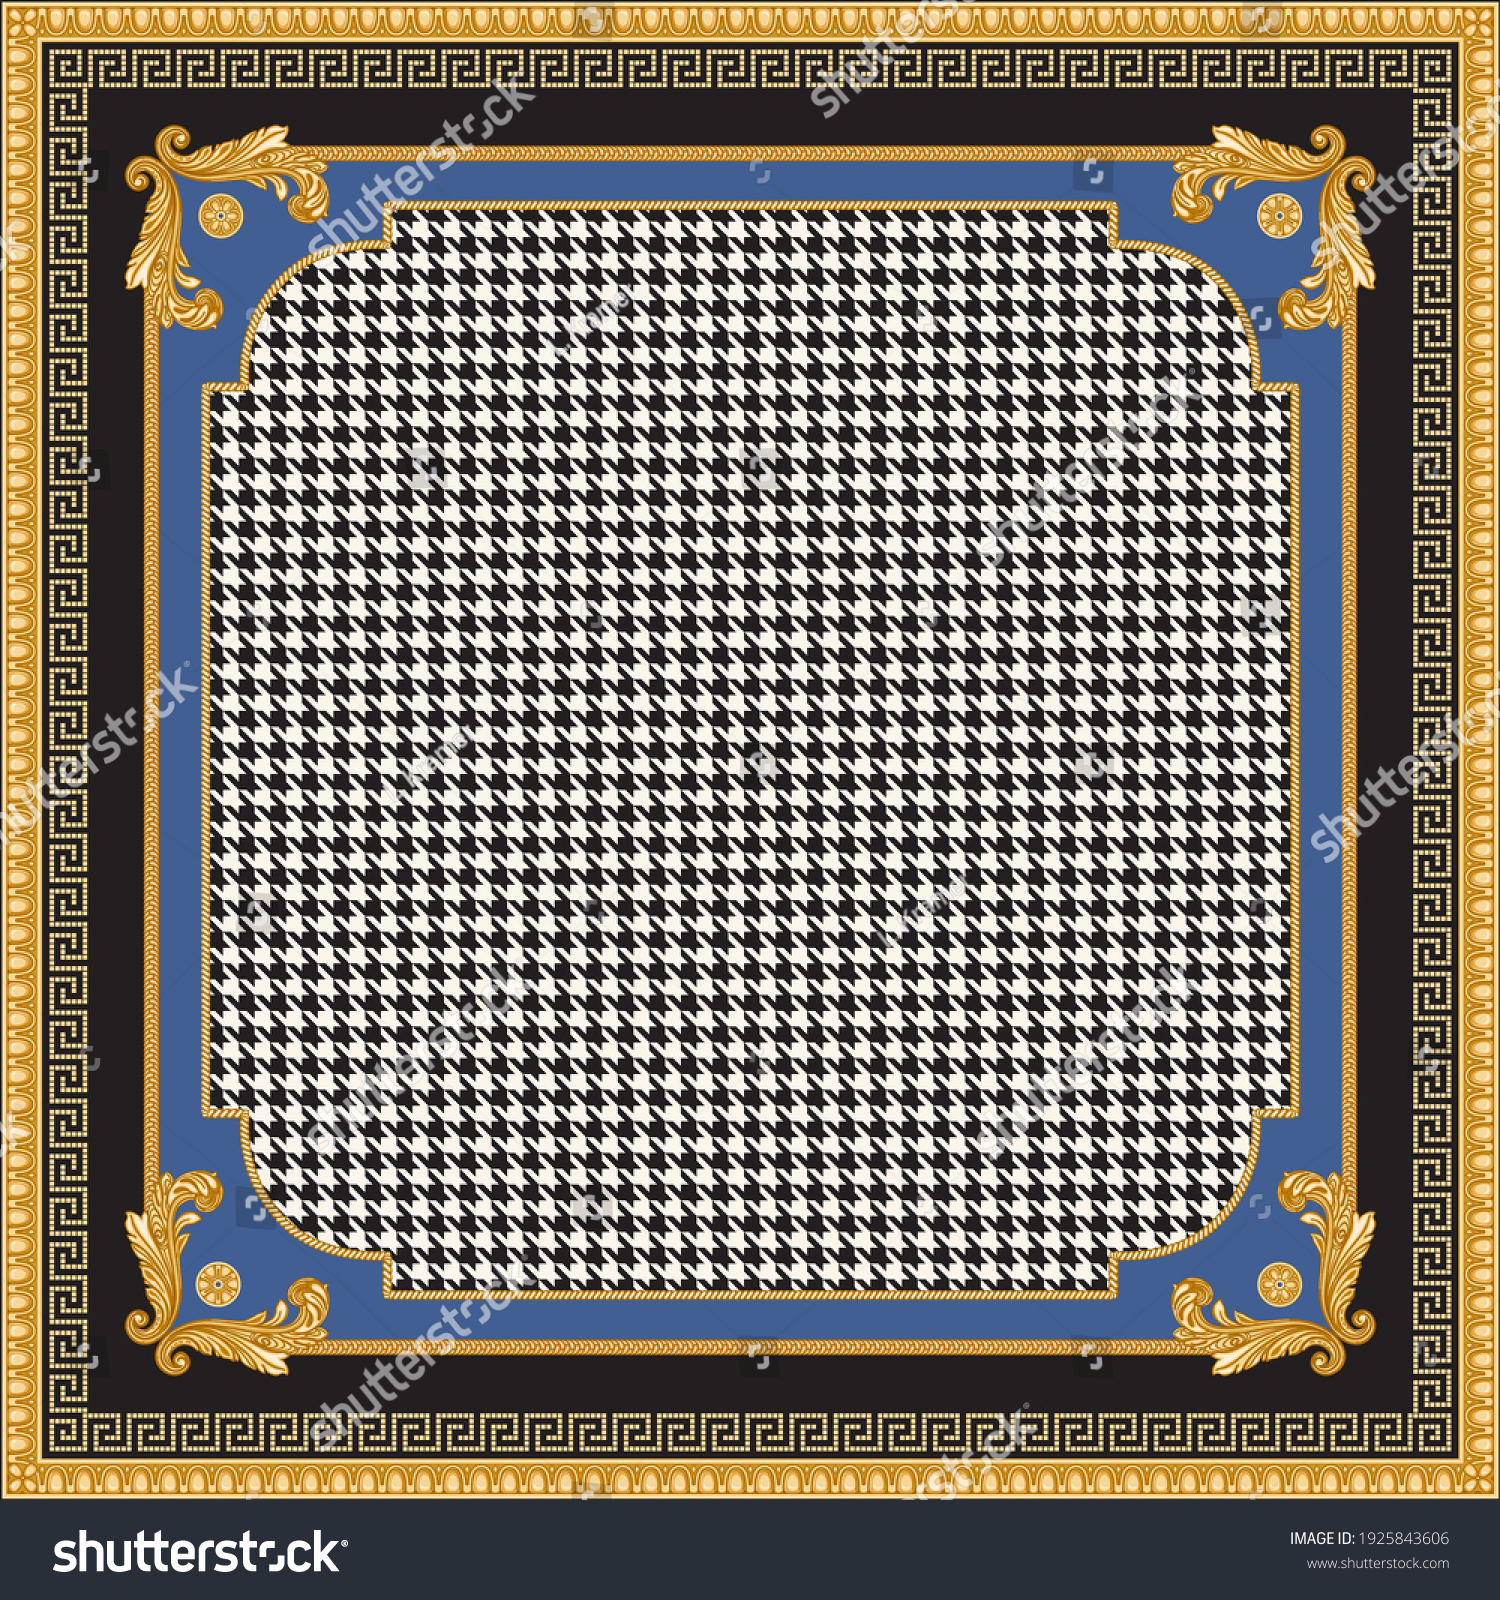 SVG of Bandana, pocket square range print on a black and white chicken feet pied-de-poule pattern background, with blue and golden frames, Gold cables, Meanders, Greek egg  frieze, Baroque scrolls  svg